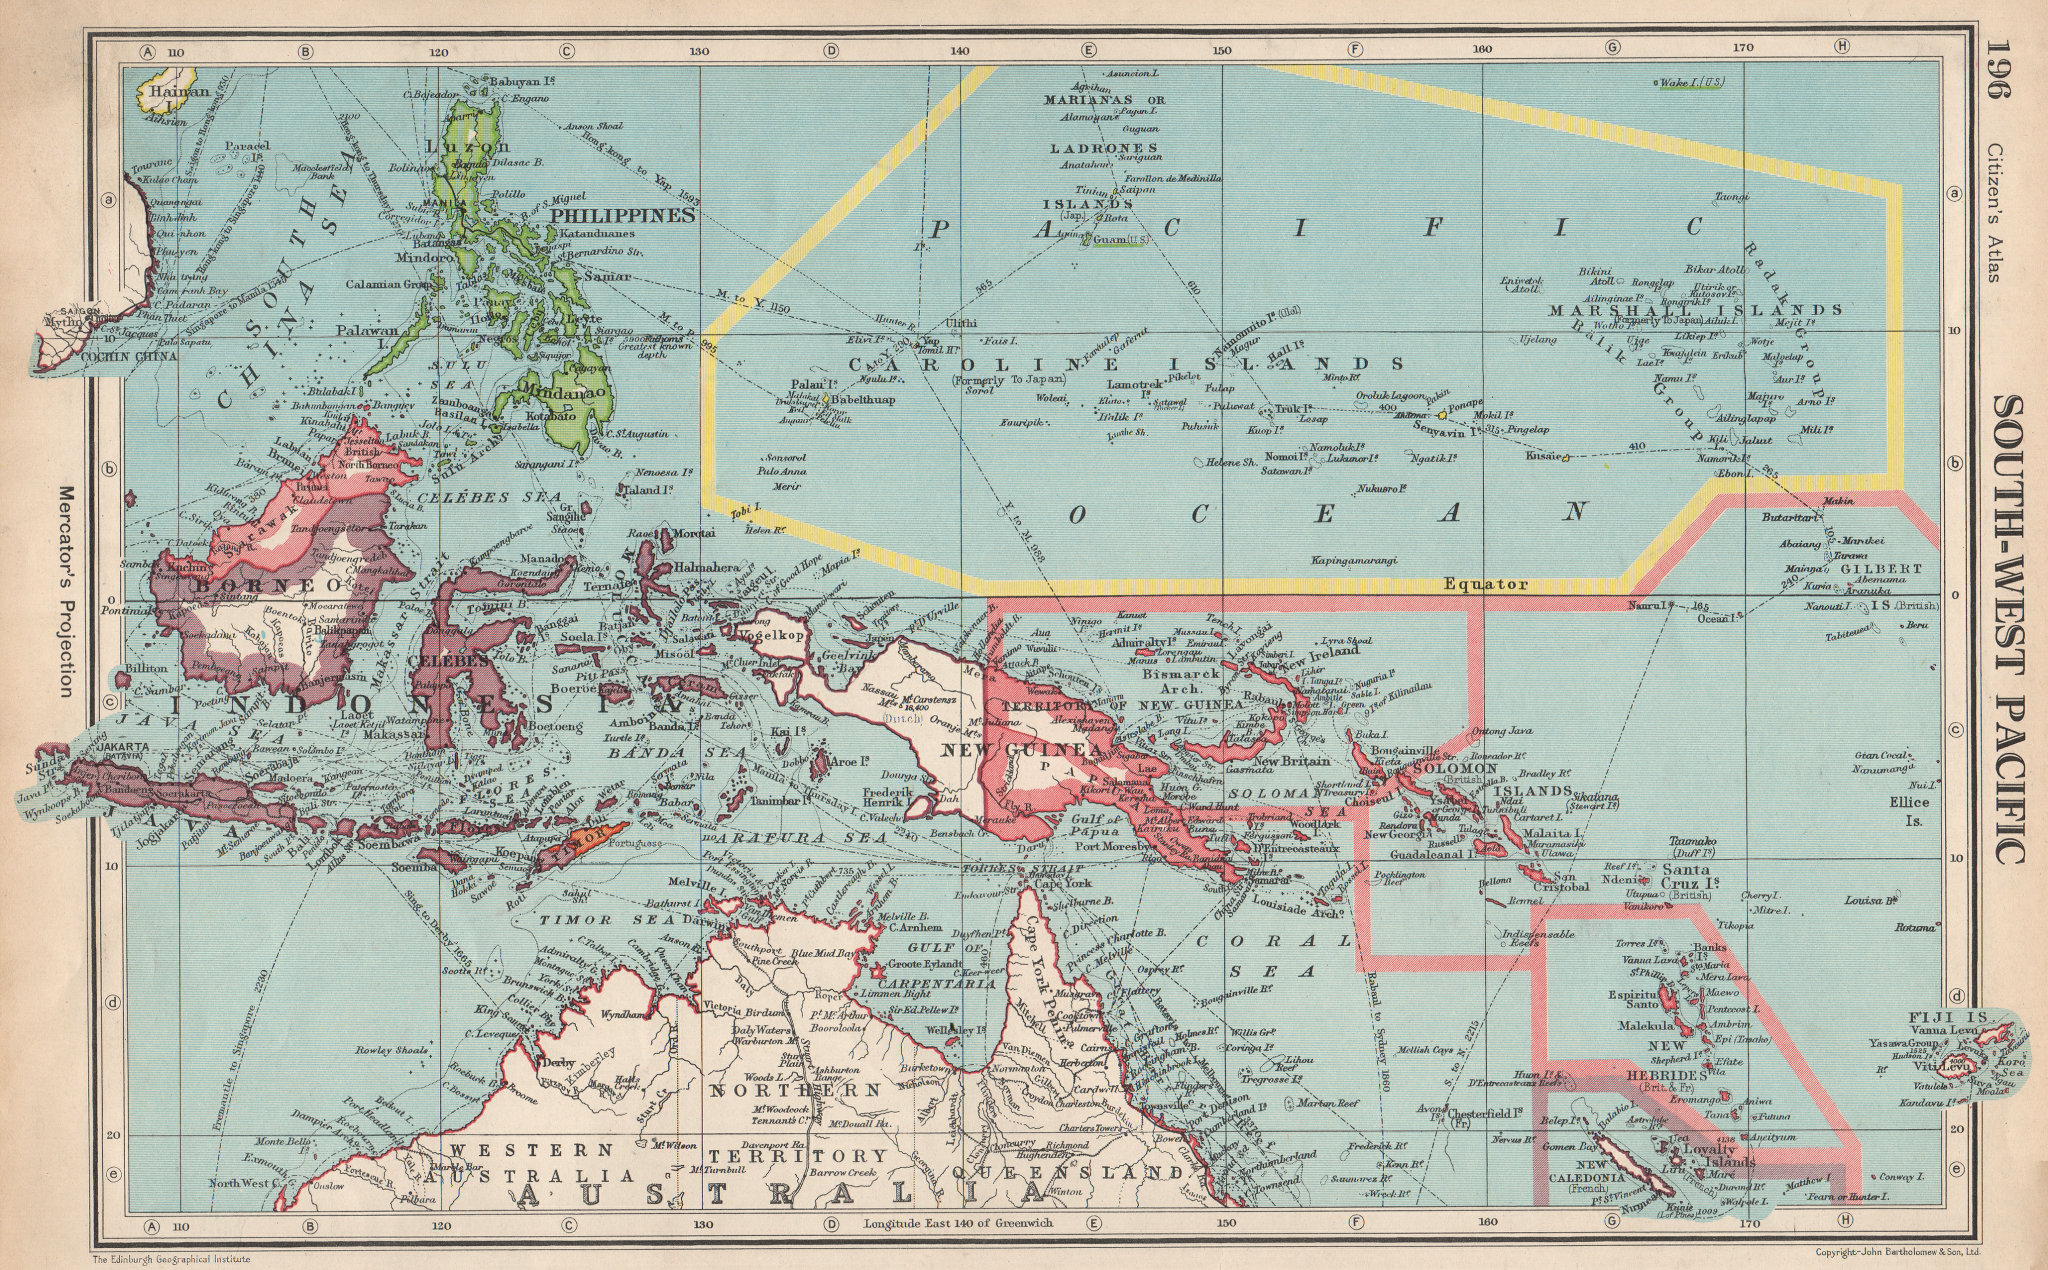 Associate Product SOUTH-WEST PACIFIC. Melanesia Micronesia Indonesia Philippines 1952 old map